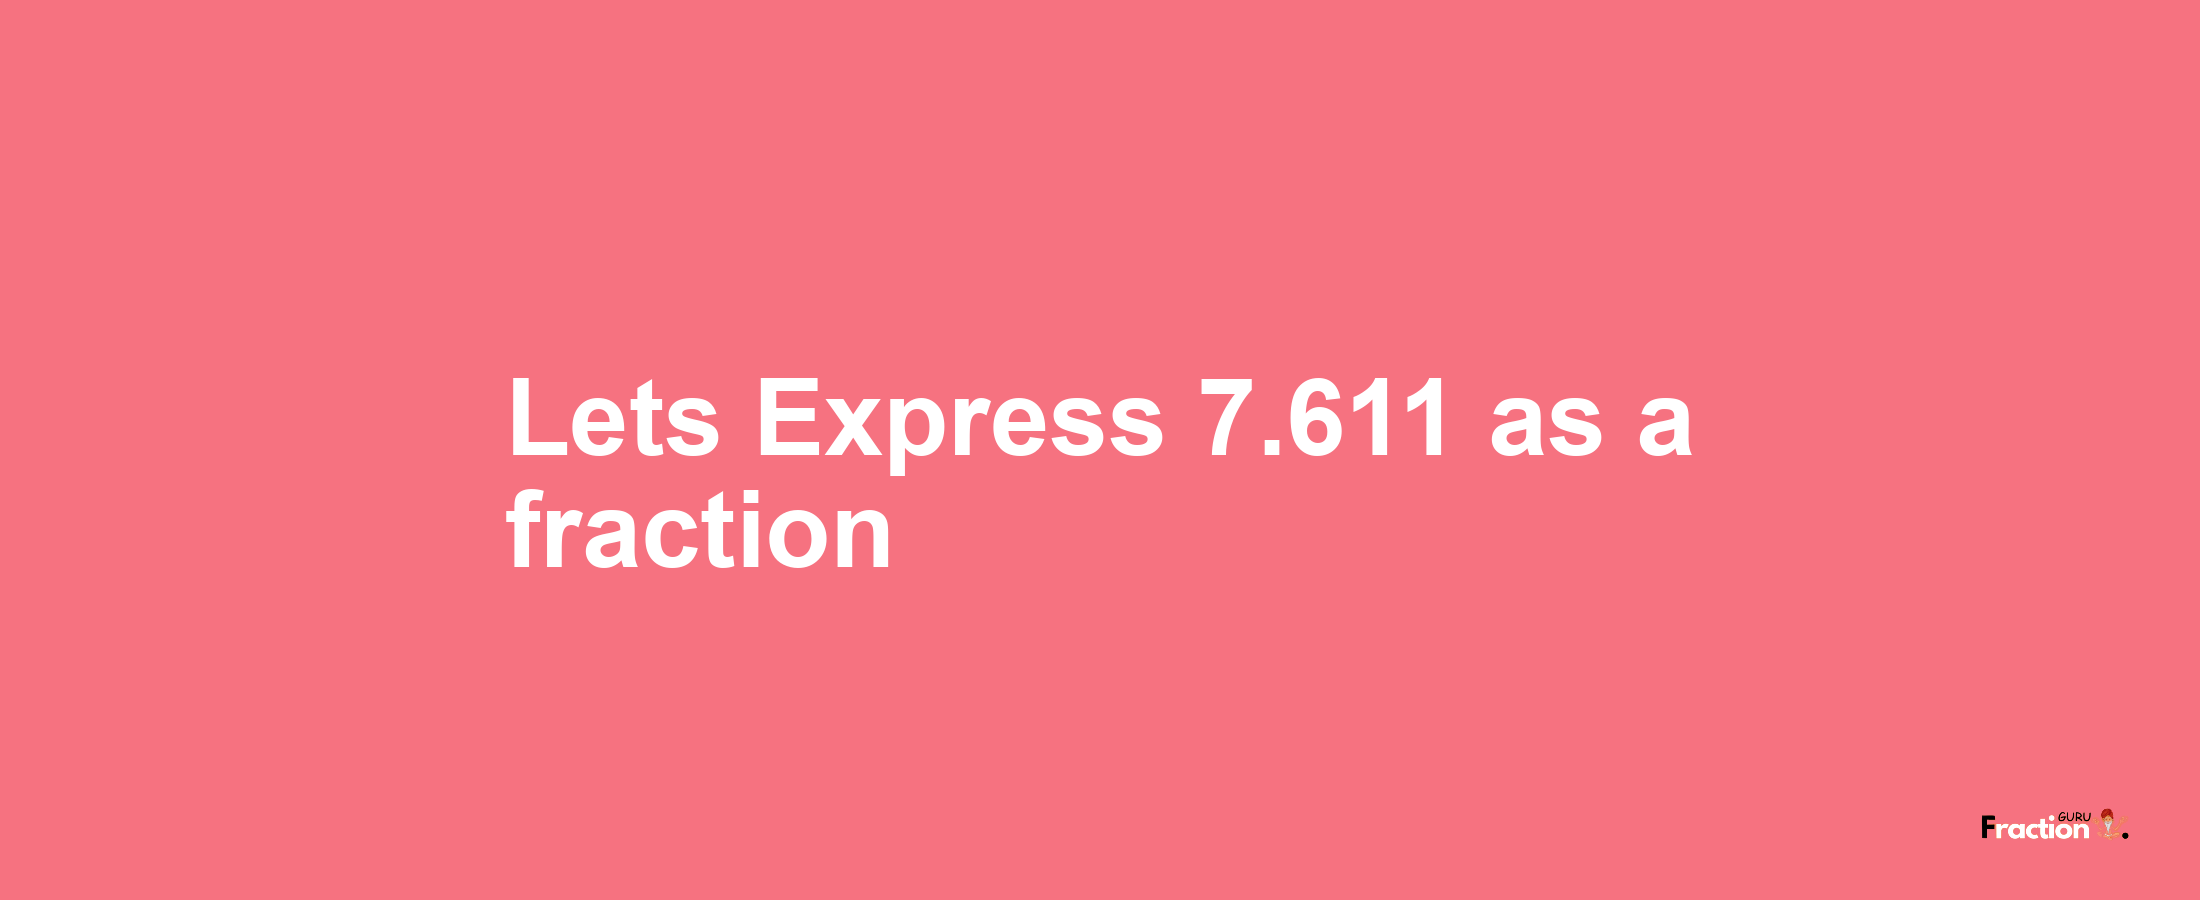 Lets Express 7.611 as afraction